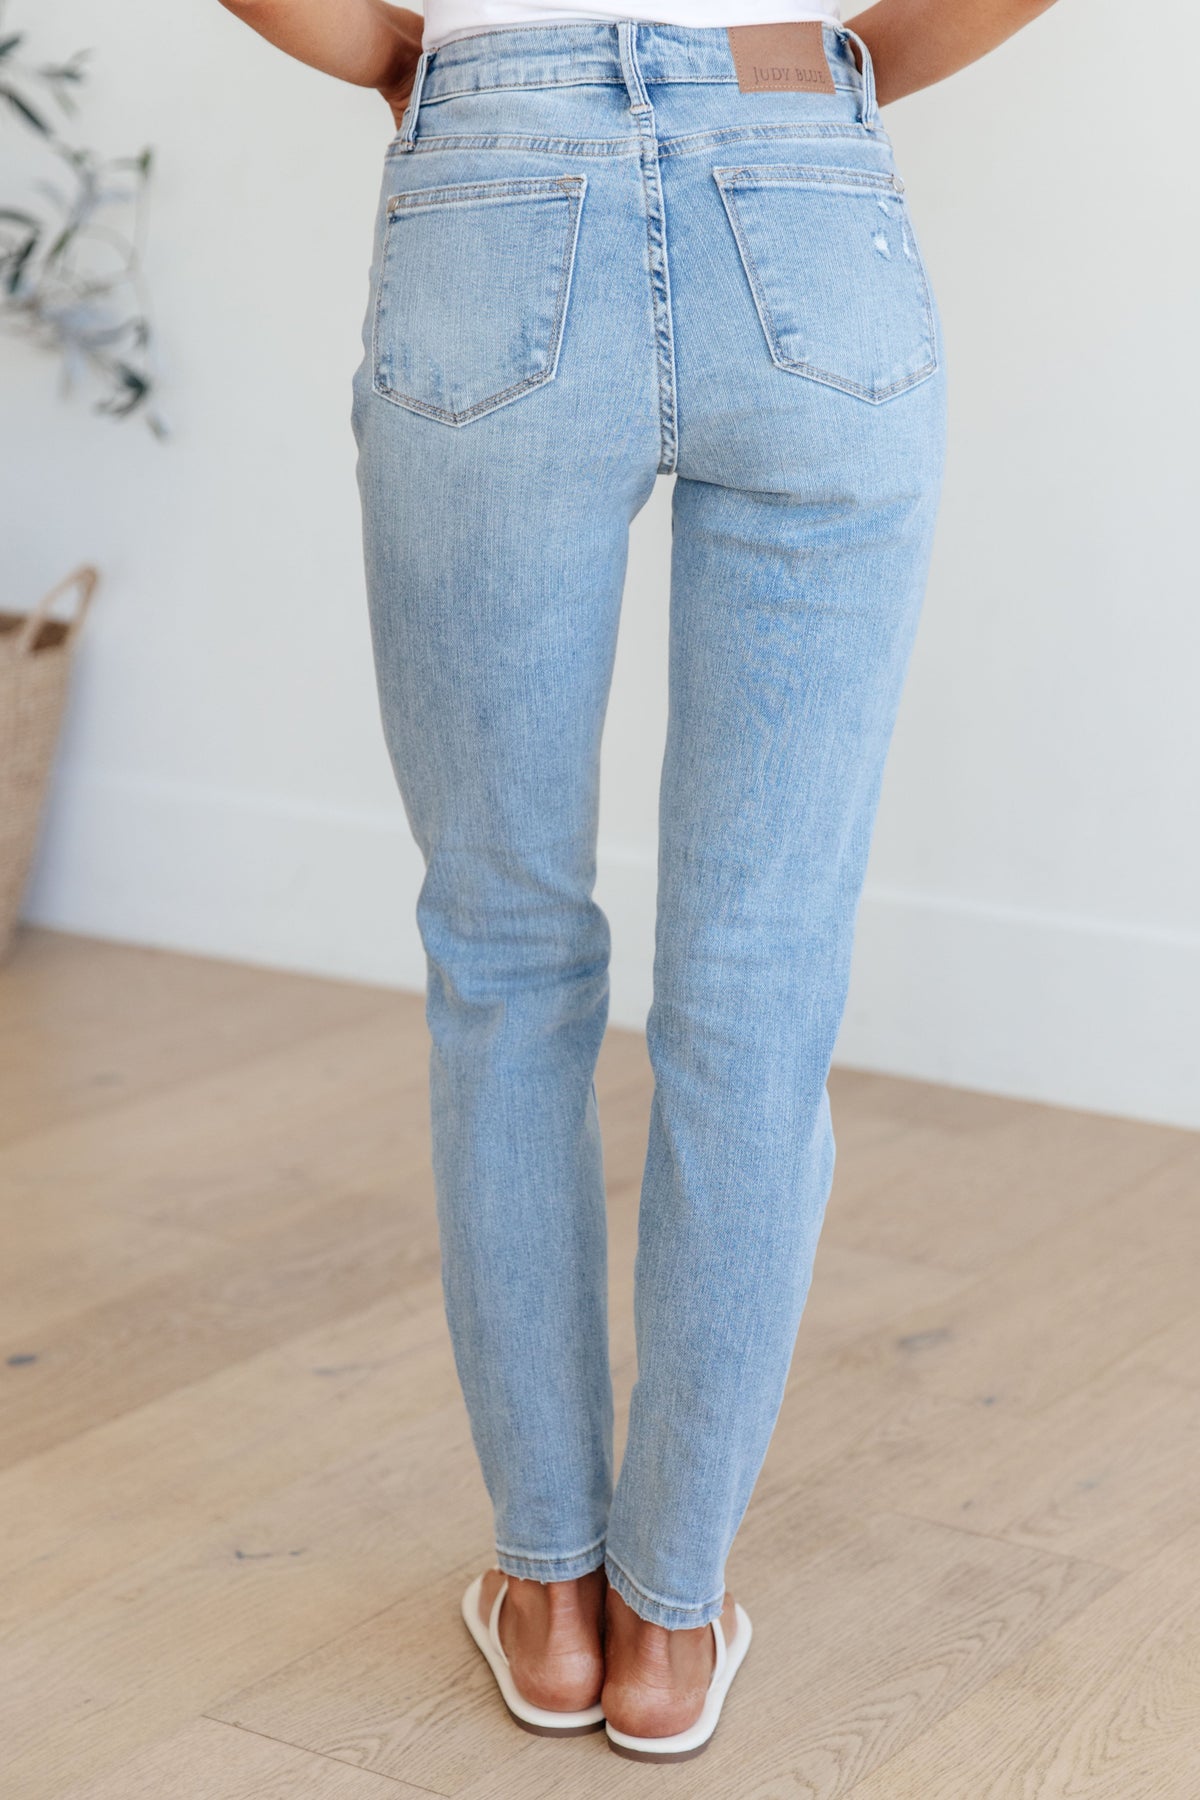 Judy Blue Eloise Mid Rise Control Top Distressed Skinny Jeans